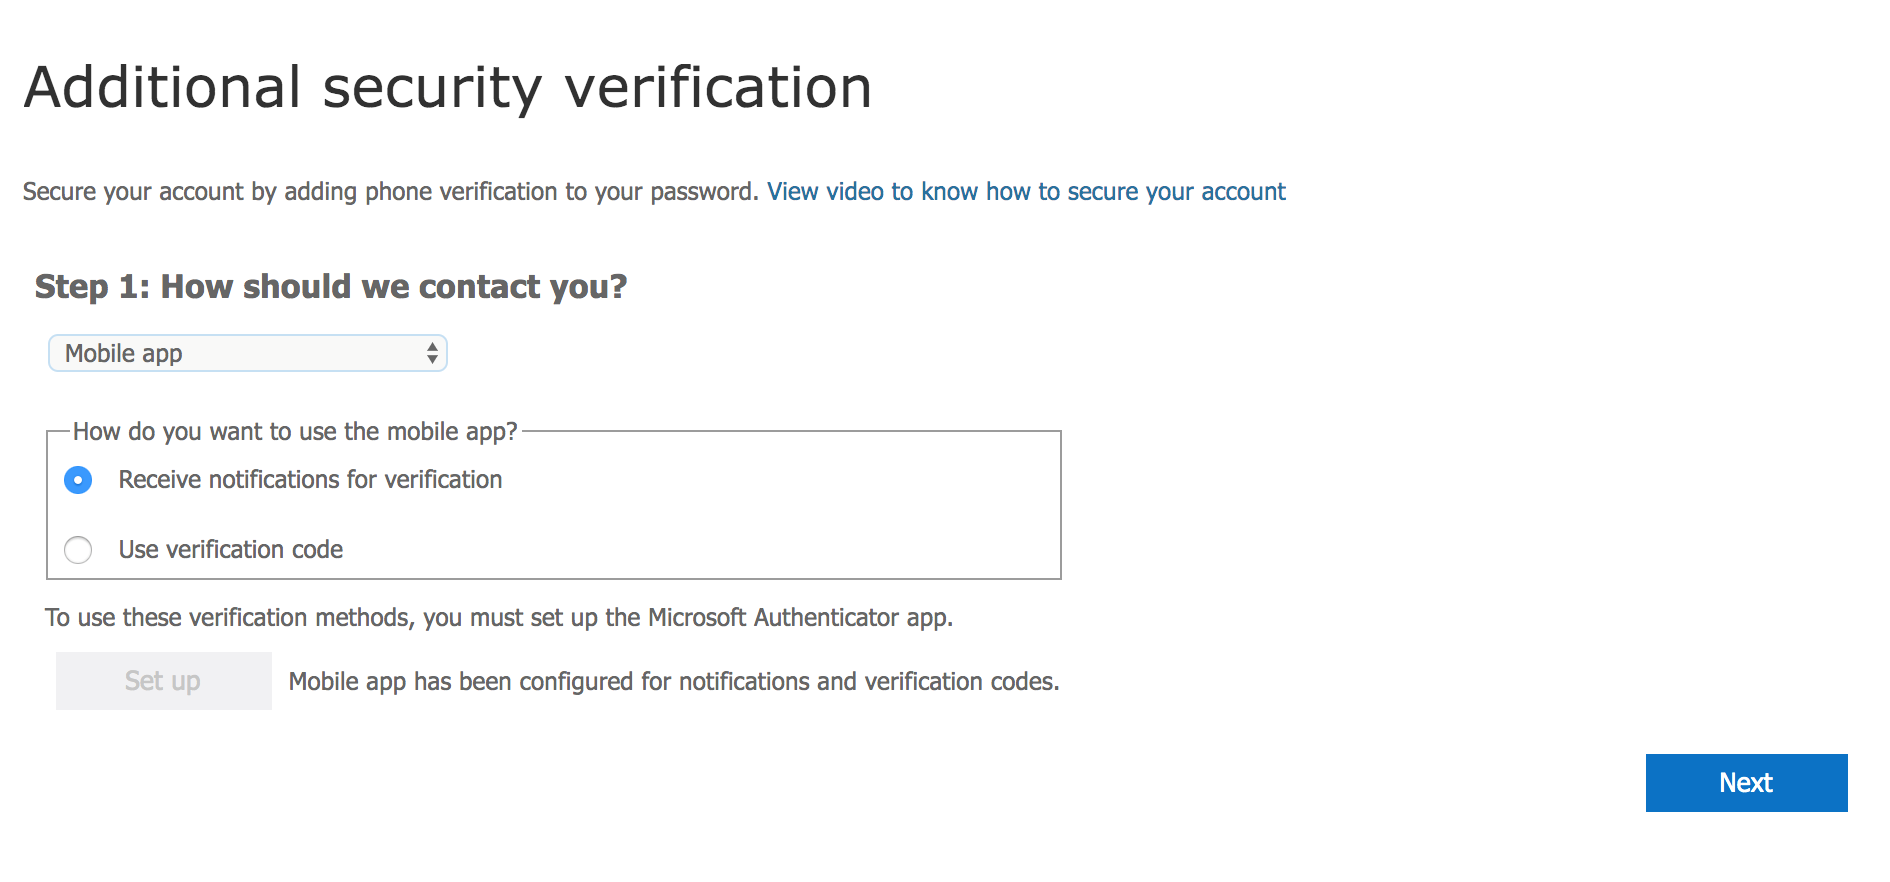 Screenshot of additional security verification in Microsoft 365 - moving on with setup